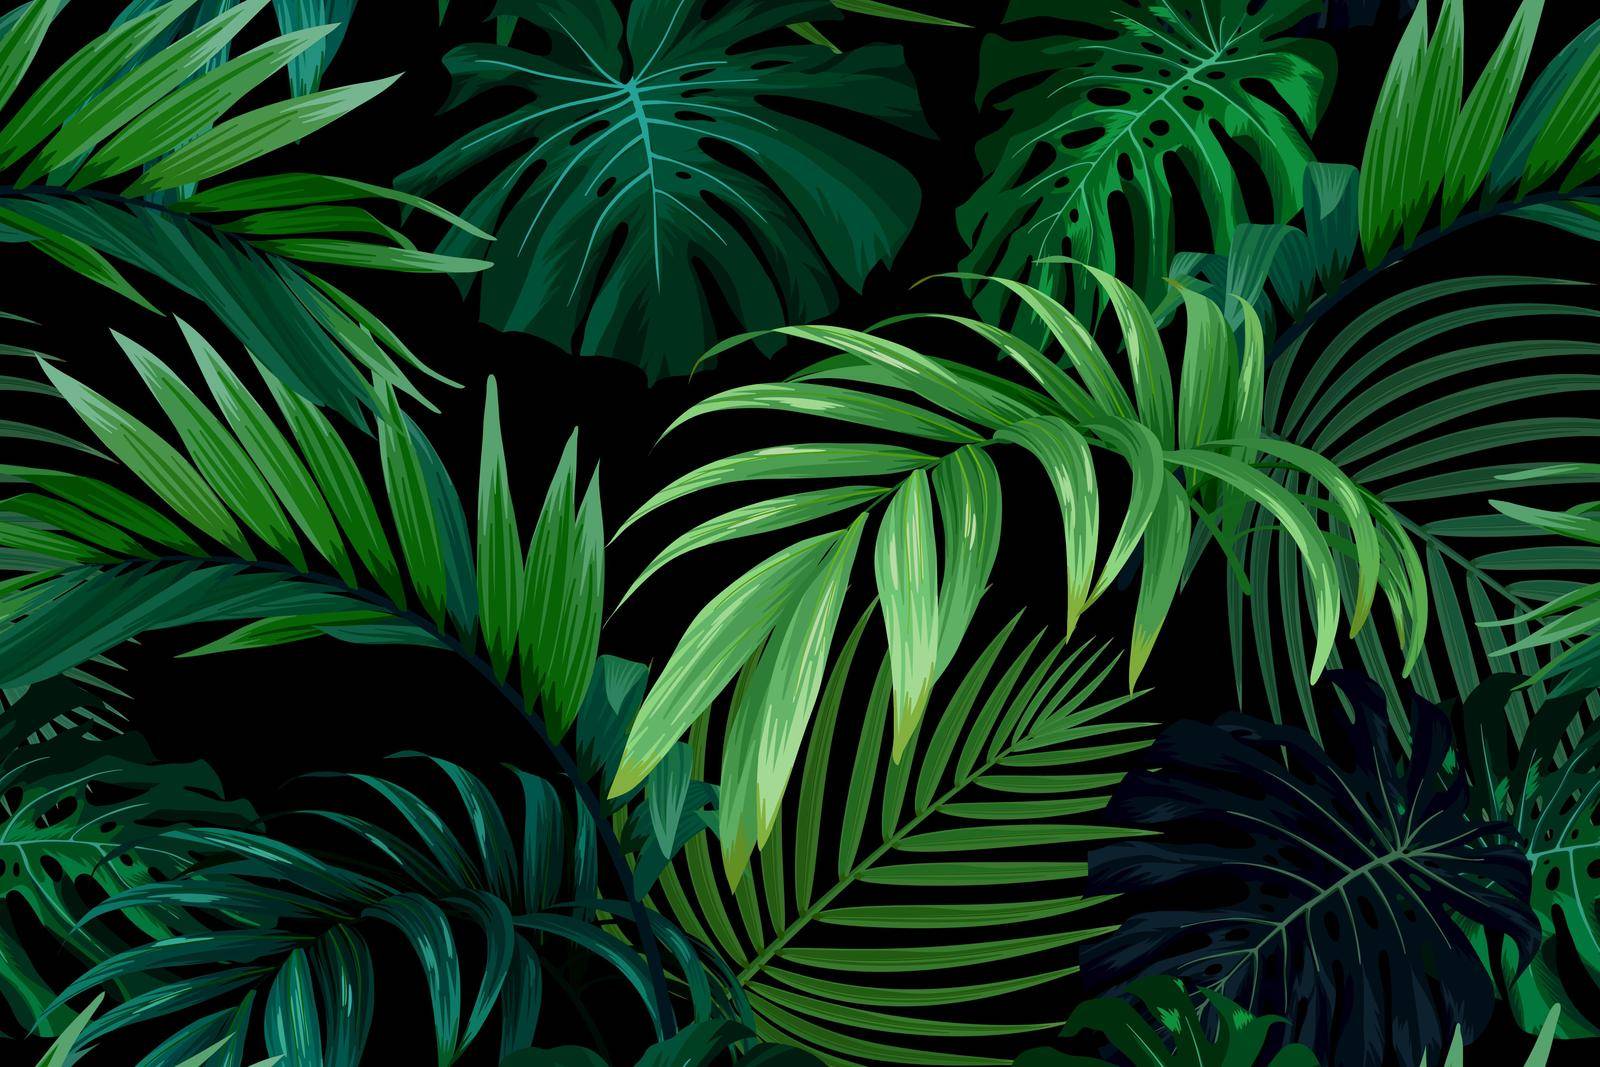 Seamless hand drawn tropical pattern with monstera palm leaves on dark background. Vector illustration.